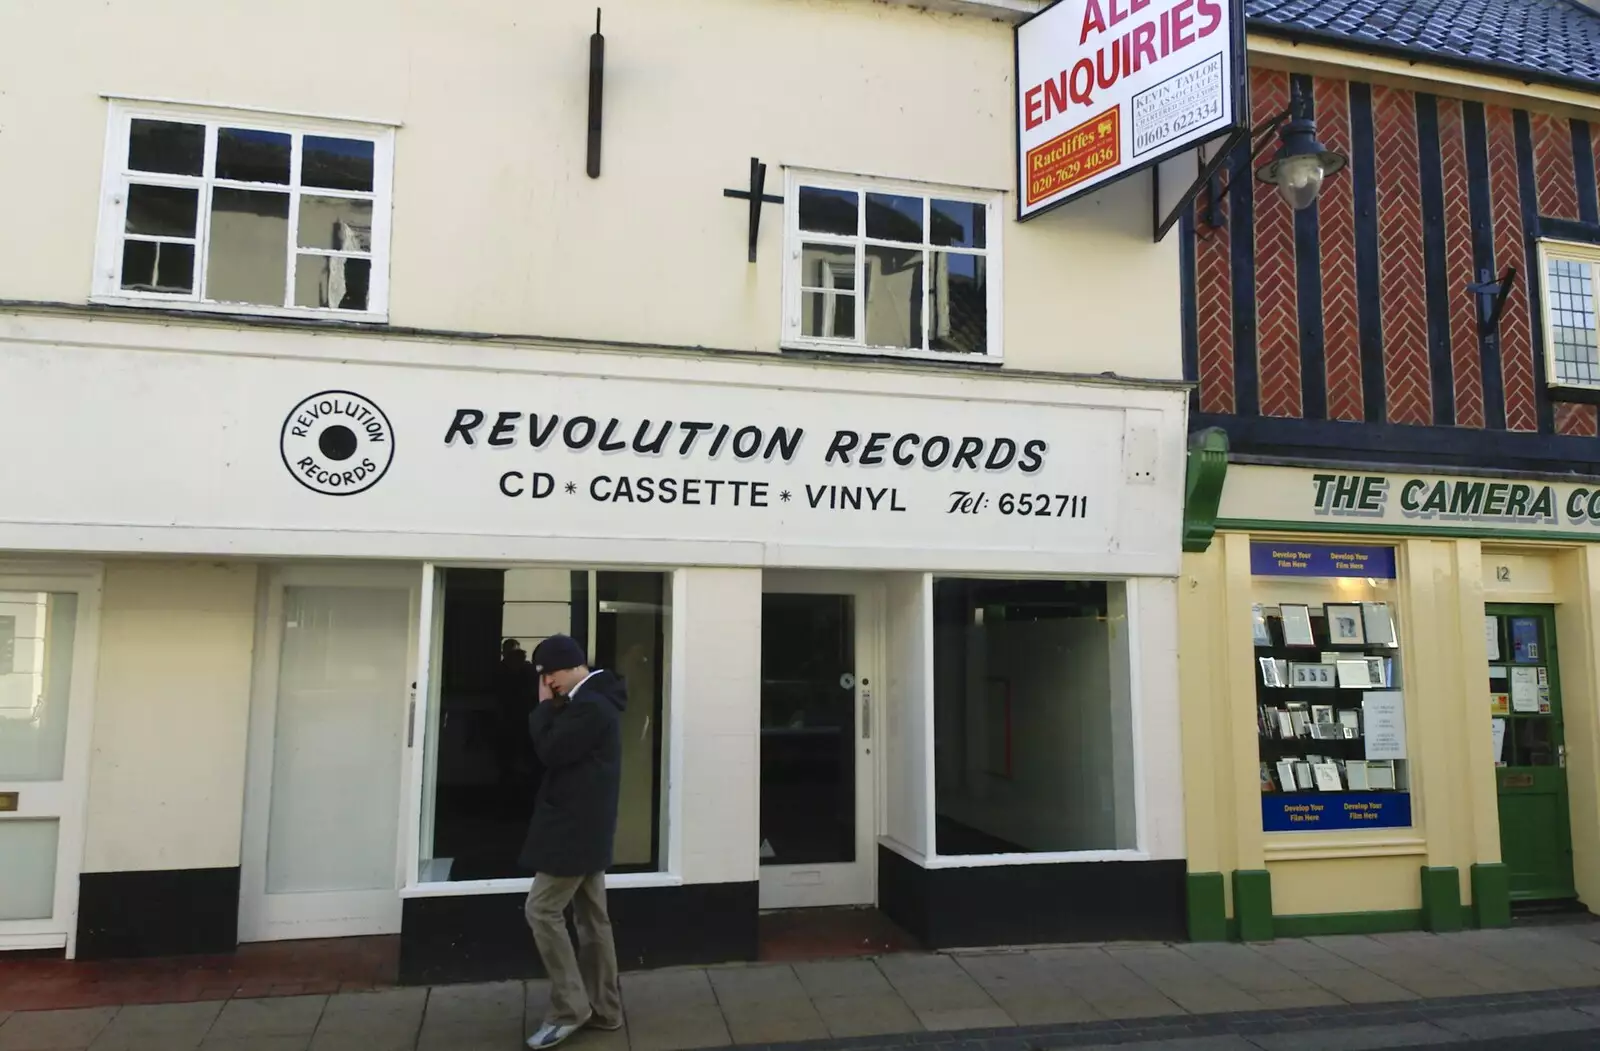 Revolution Records is closed. A sad day, from Wrecked Cars, A Night Out and Stick Game in the Cherry Tree, Cambridge and Yaxley, Suffolk- 24th February 2006